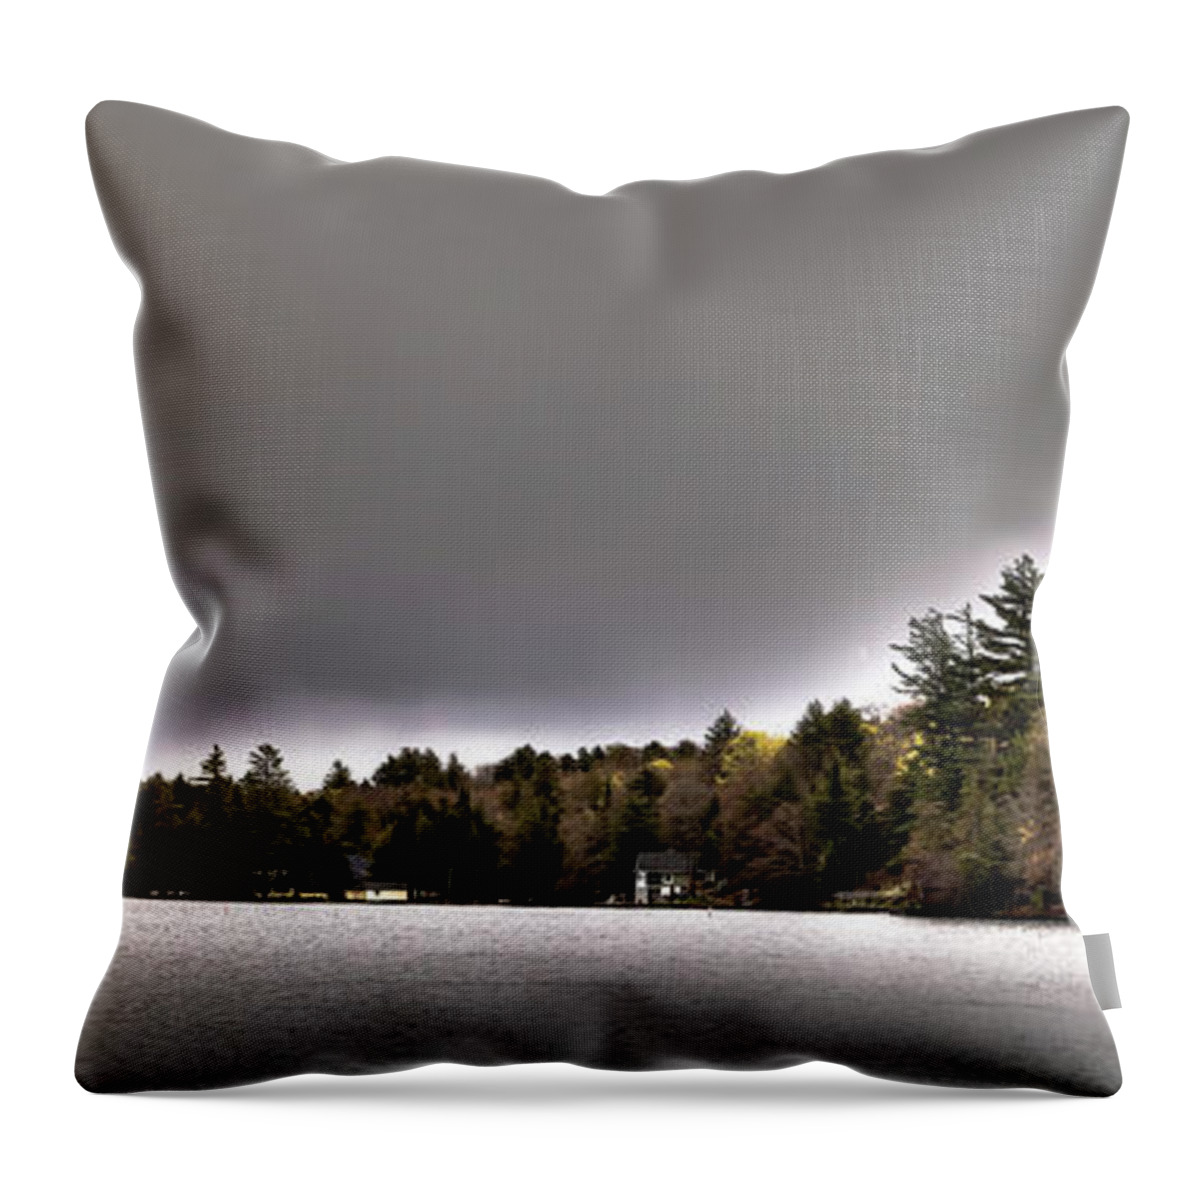 Pond Panorama Throw Pillow featuring the photograph Pond Panorama by David Patterson